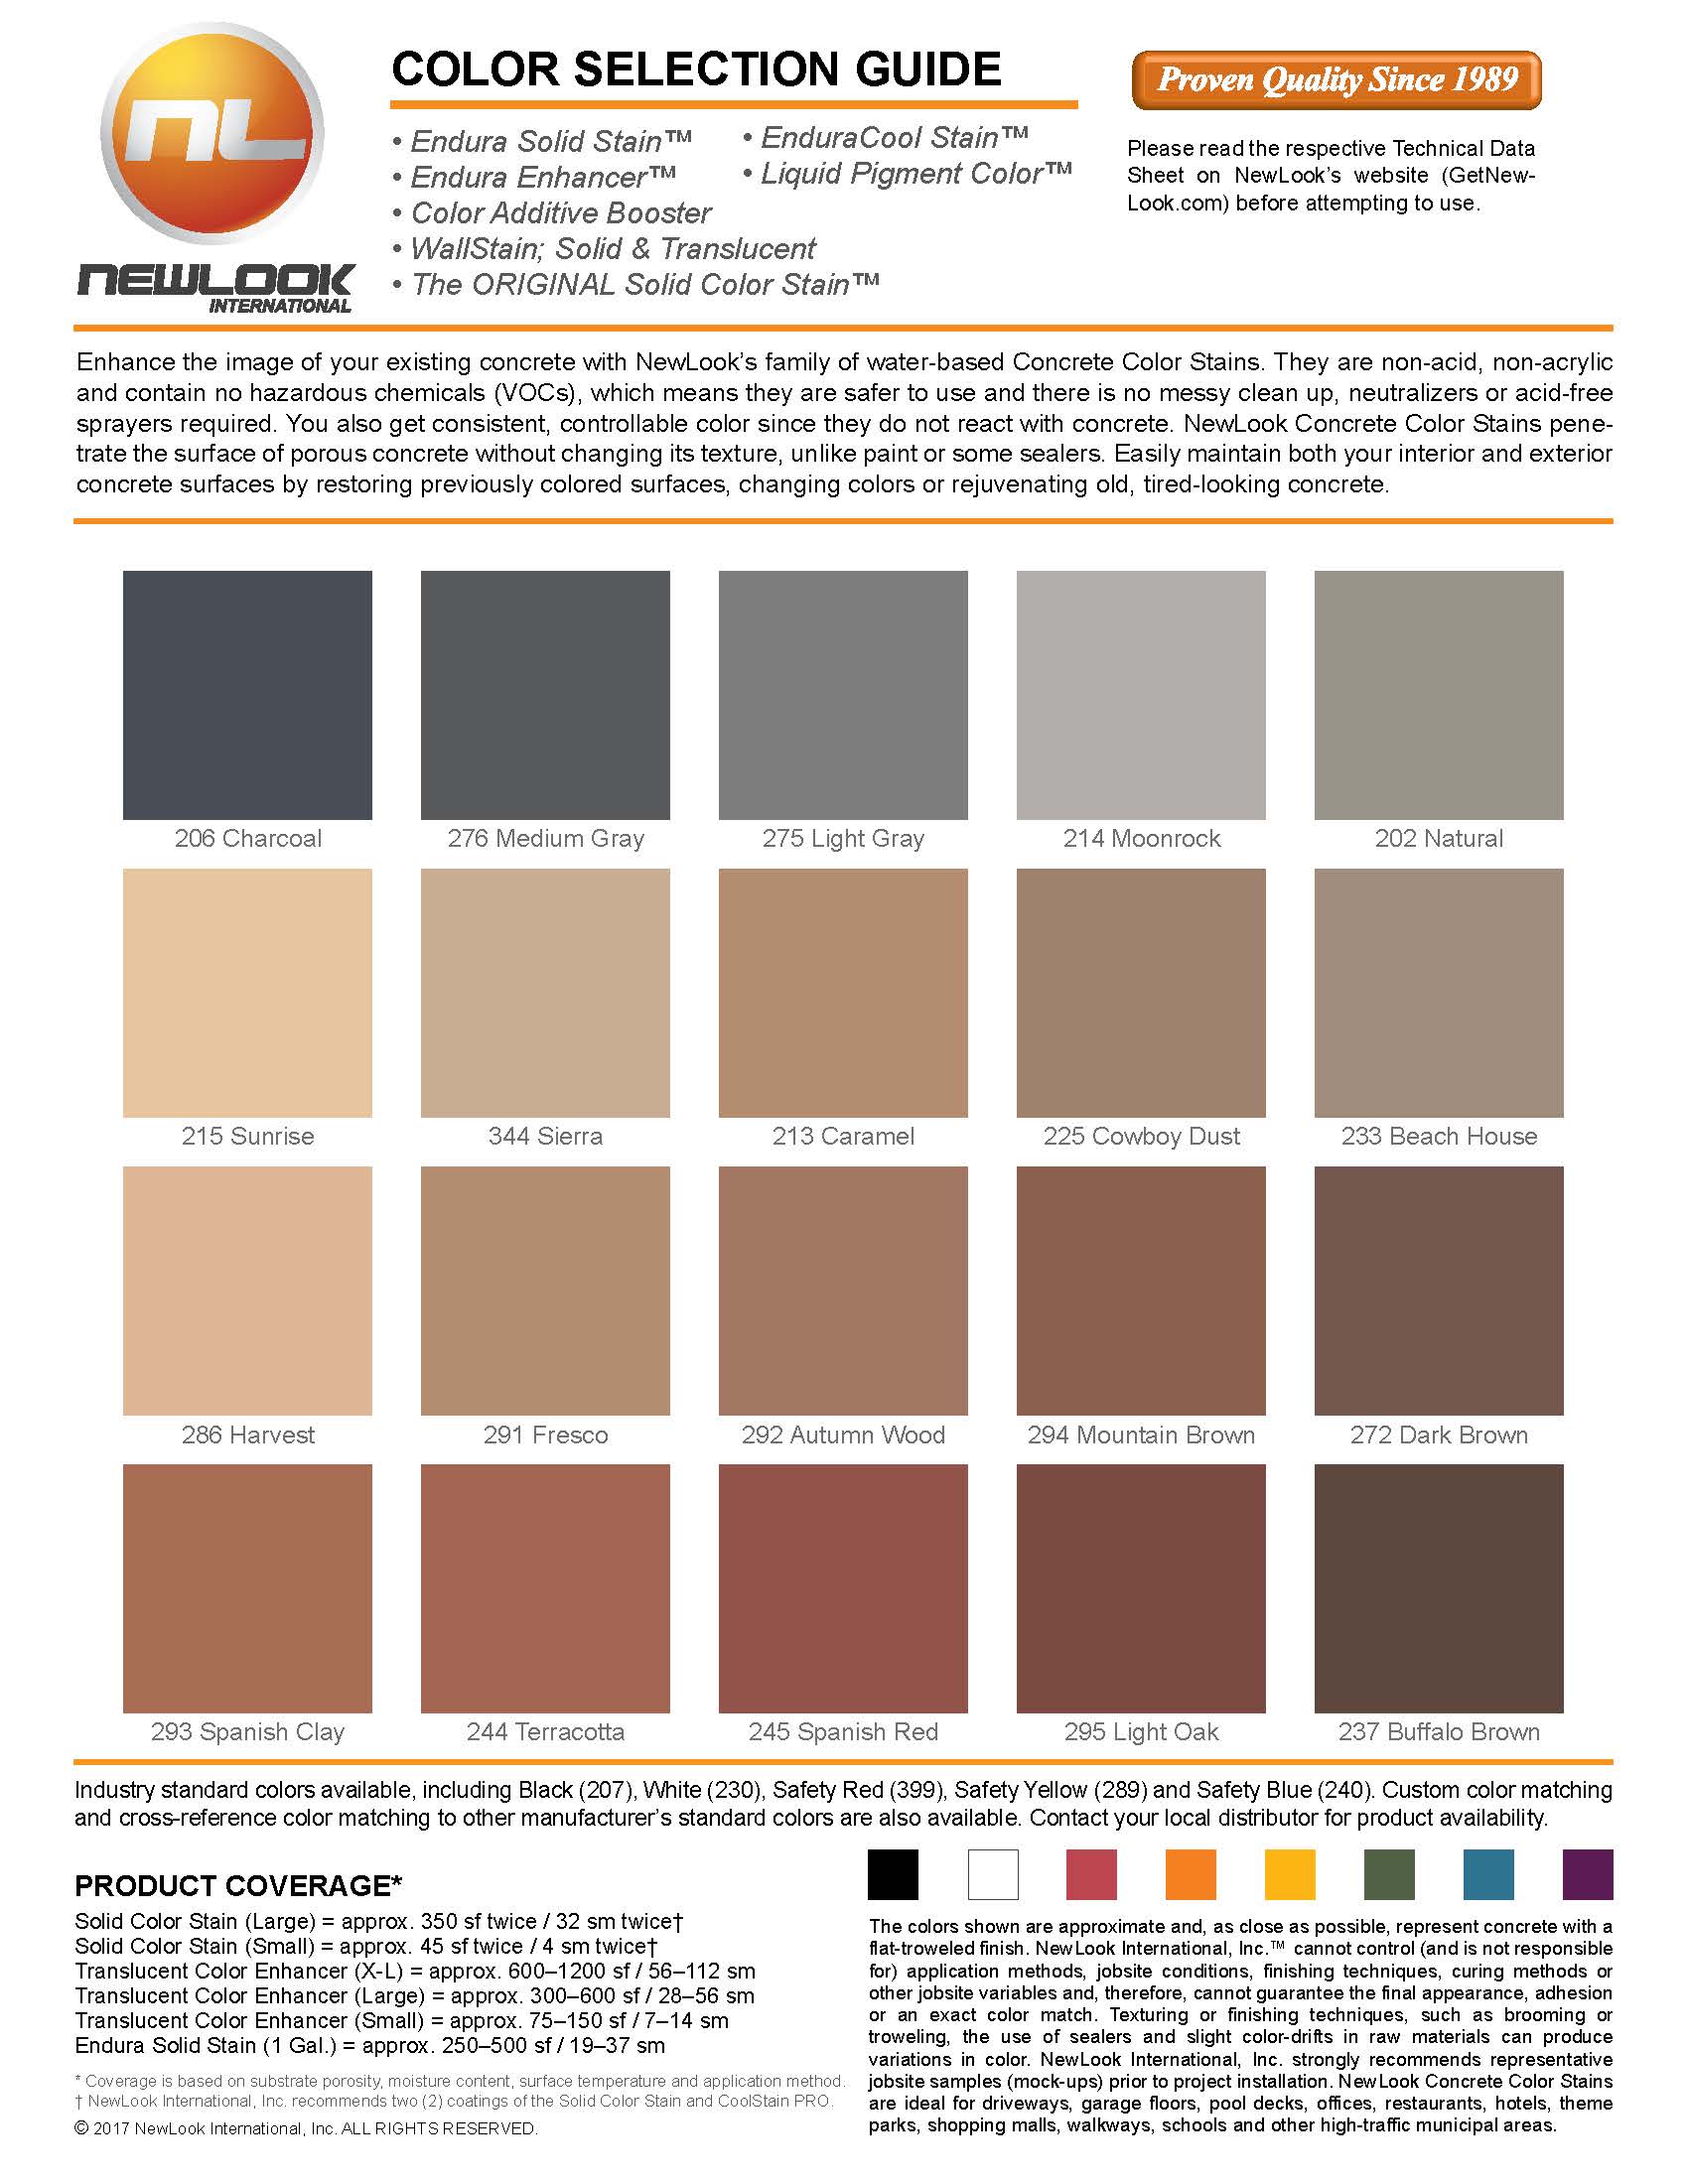 Newlook Products Endura Concrete Colors | Xtreme Polishing Systems